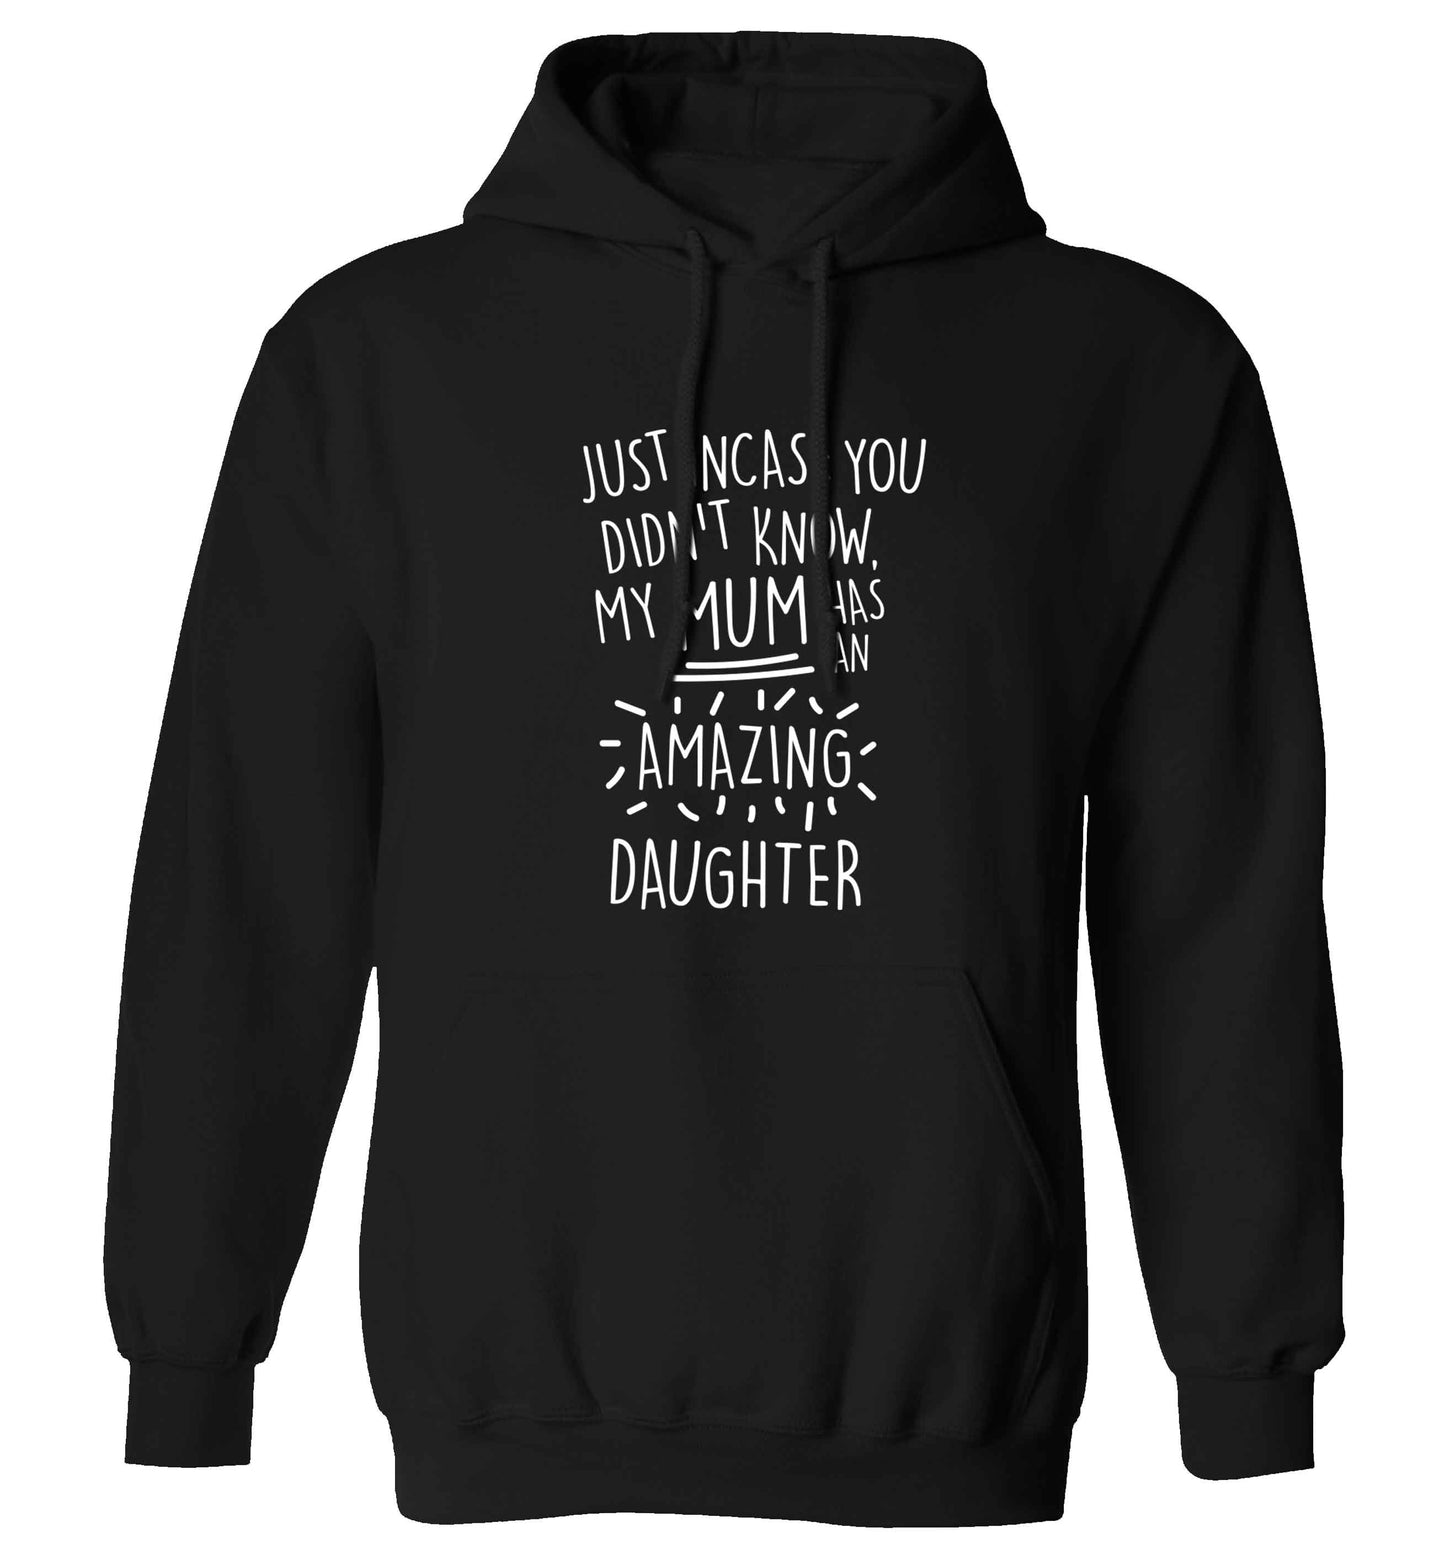 Just incase you didn't know my mum has an amazing daughter adults unisex black hoodie 2XL